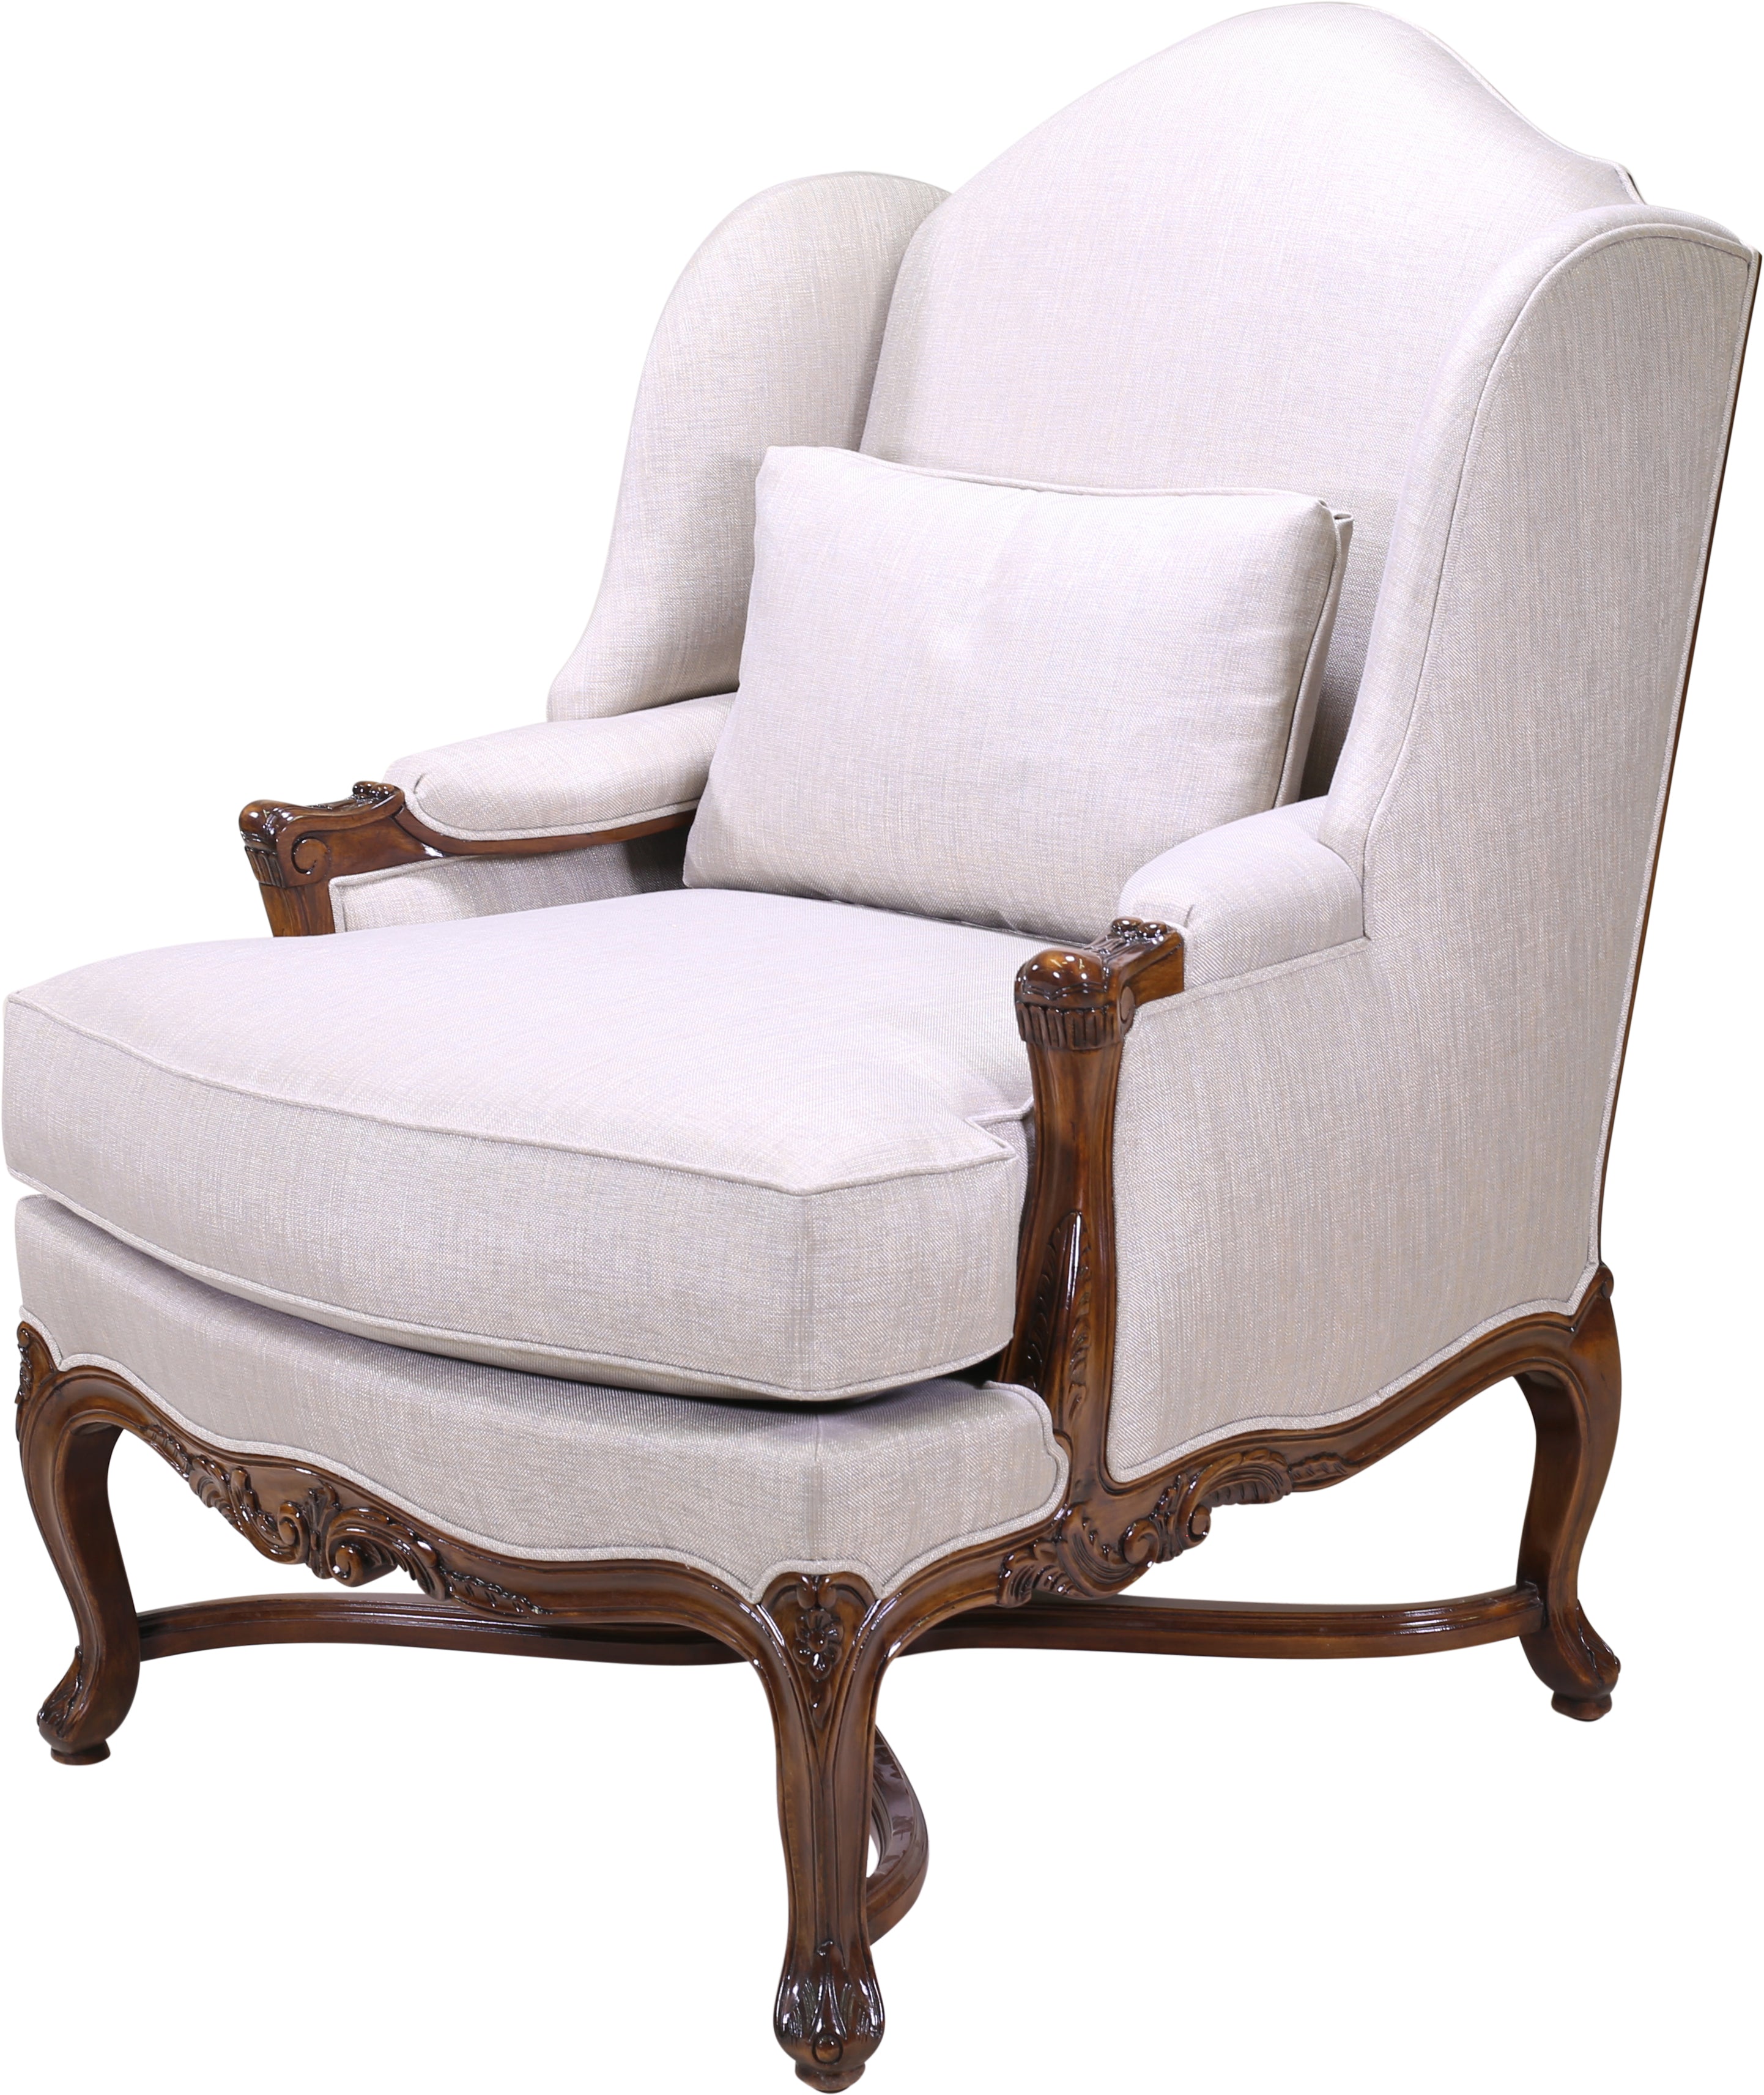 LARGE LOUIS XV STYLE WING BACK LOUNGE CHAIR William Switzer